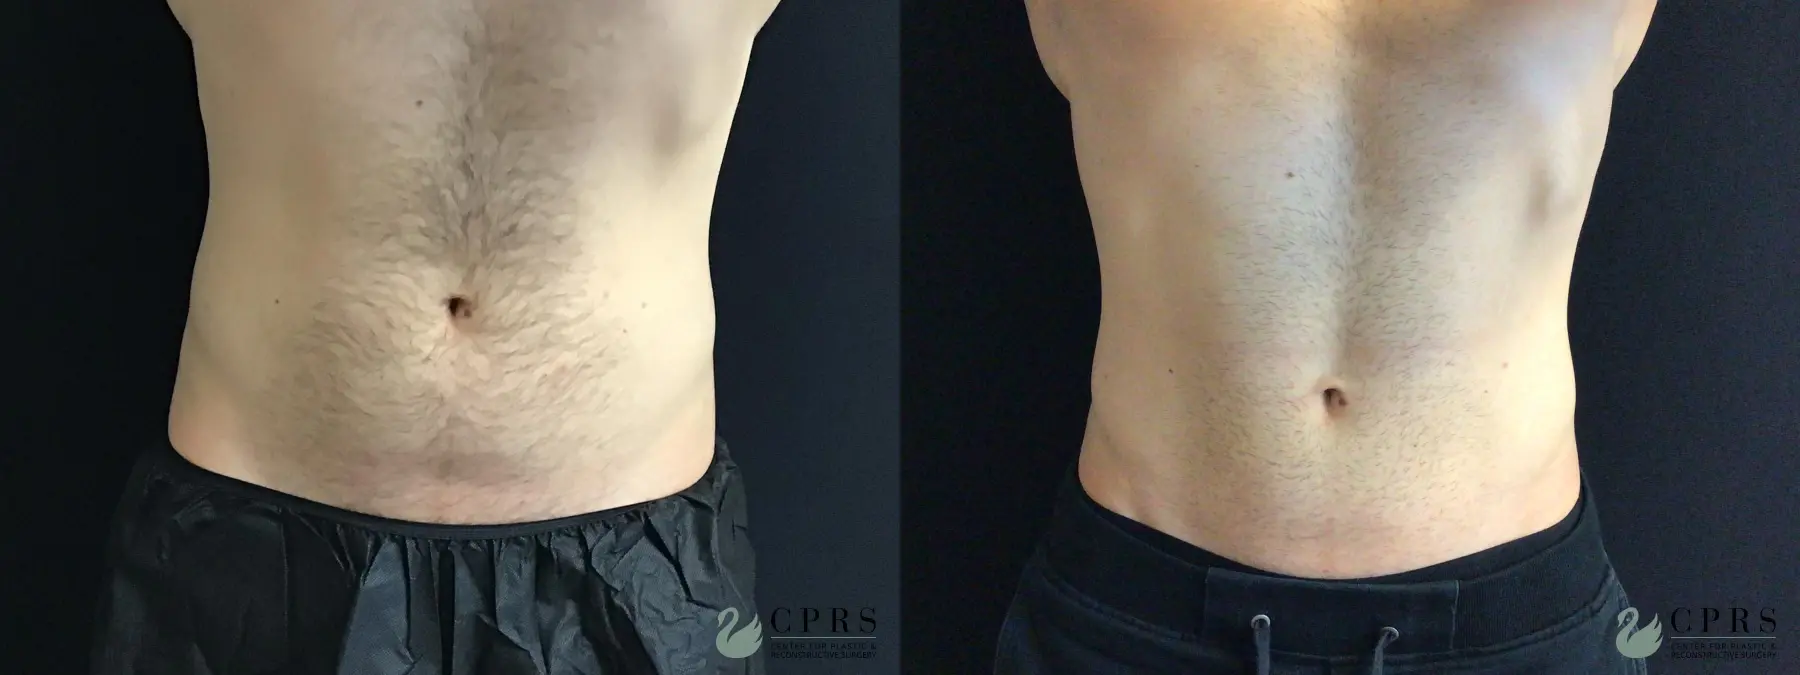 CoolSculpting®: Patient 3 - Before and After  